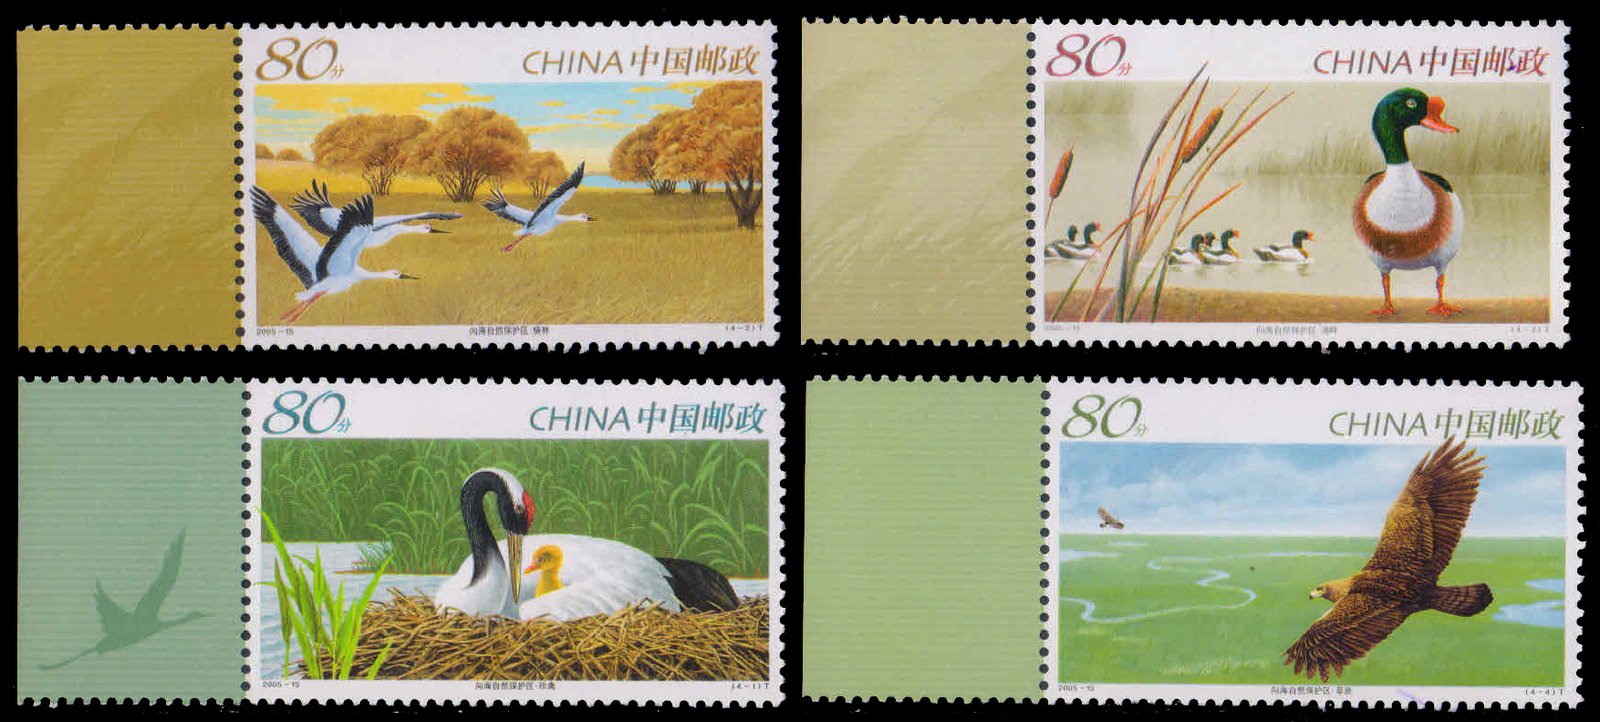 CHINA 2005-Birds, Crans and Chick, Eagle, Set of 4, MNH, S.G. 5000-5003-Cat � 8-